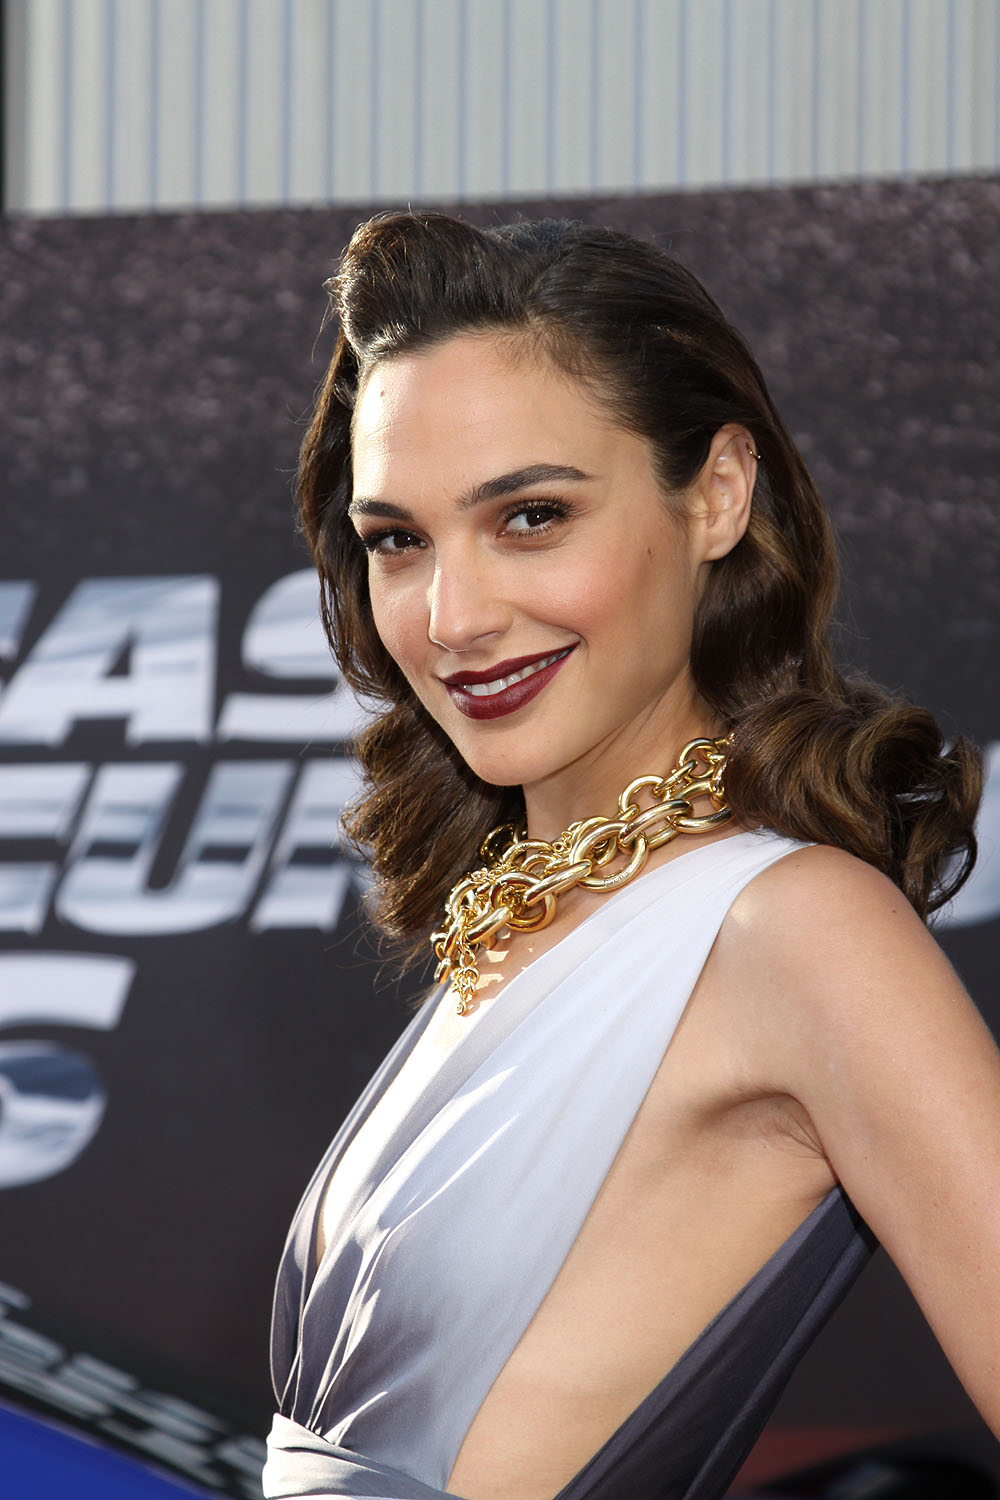 Gal Gadot At The American Premiere Of Fast Furious 6 C 2013 Sue Schneider Assignment X Assignment X Gal gadot fast and furious 6 leather jacket. gal gadot at the american premiere of fast furious 6 c 2013 sue schneider assignment x assignment x